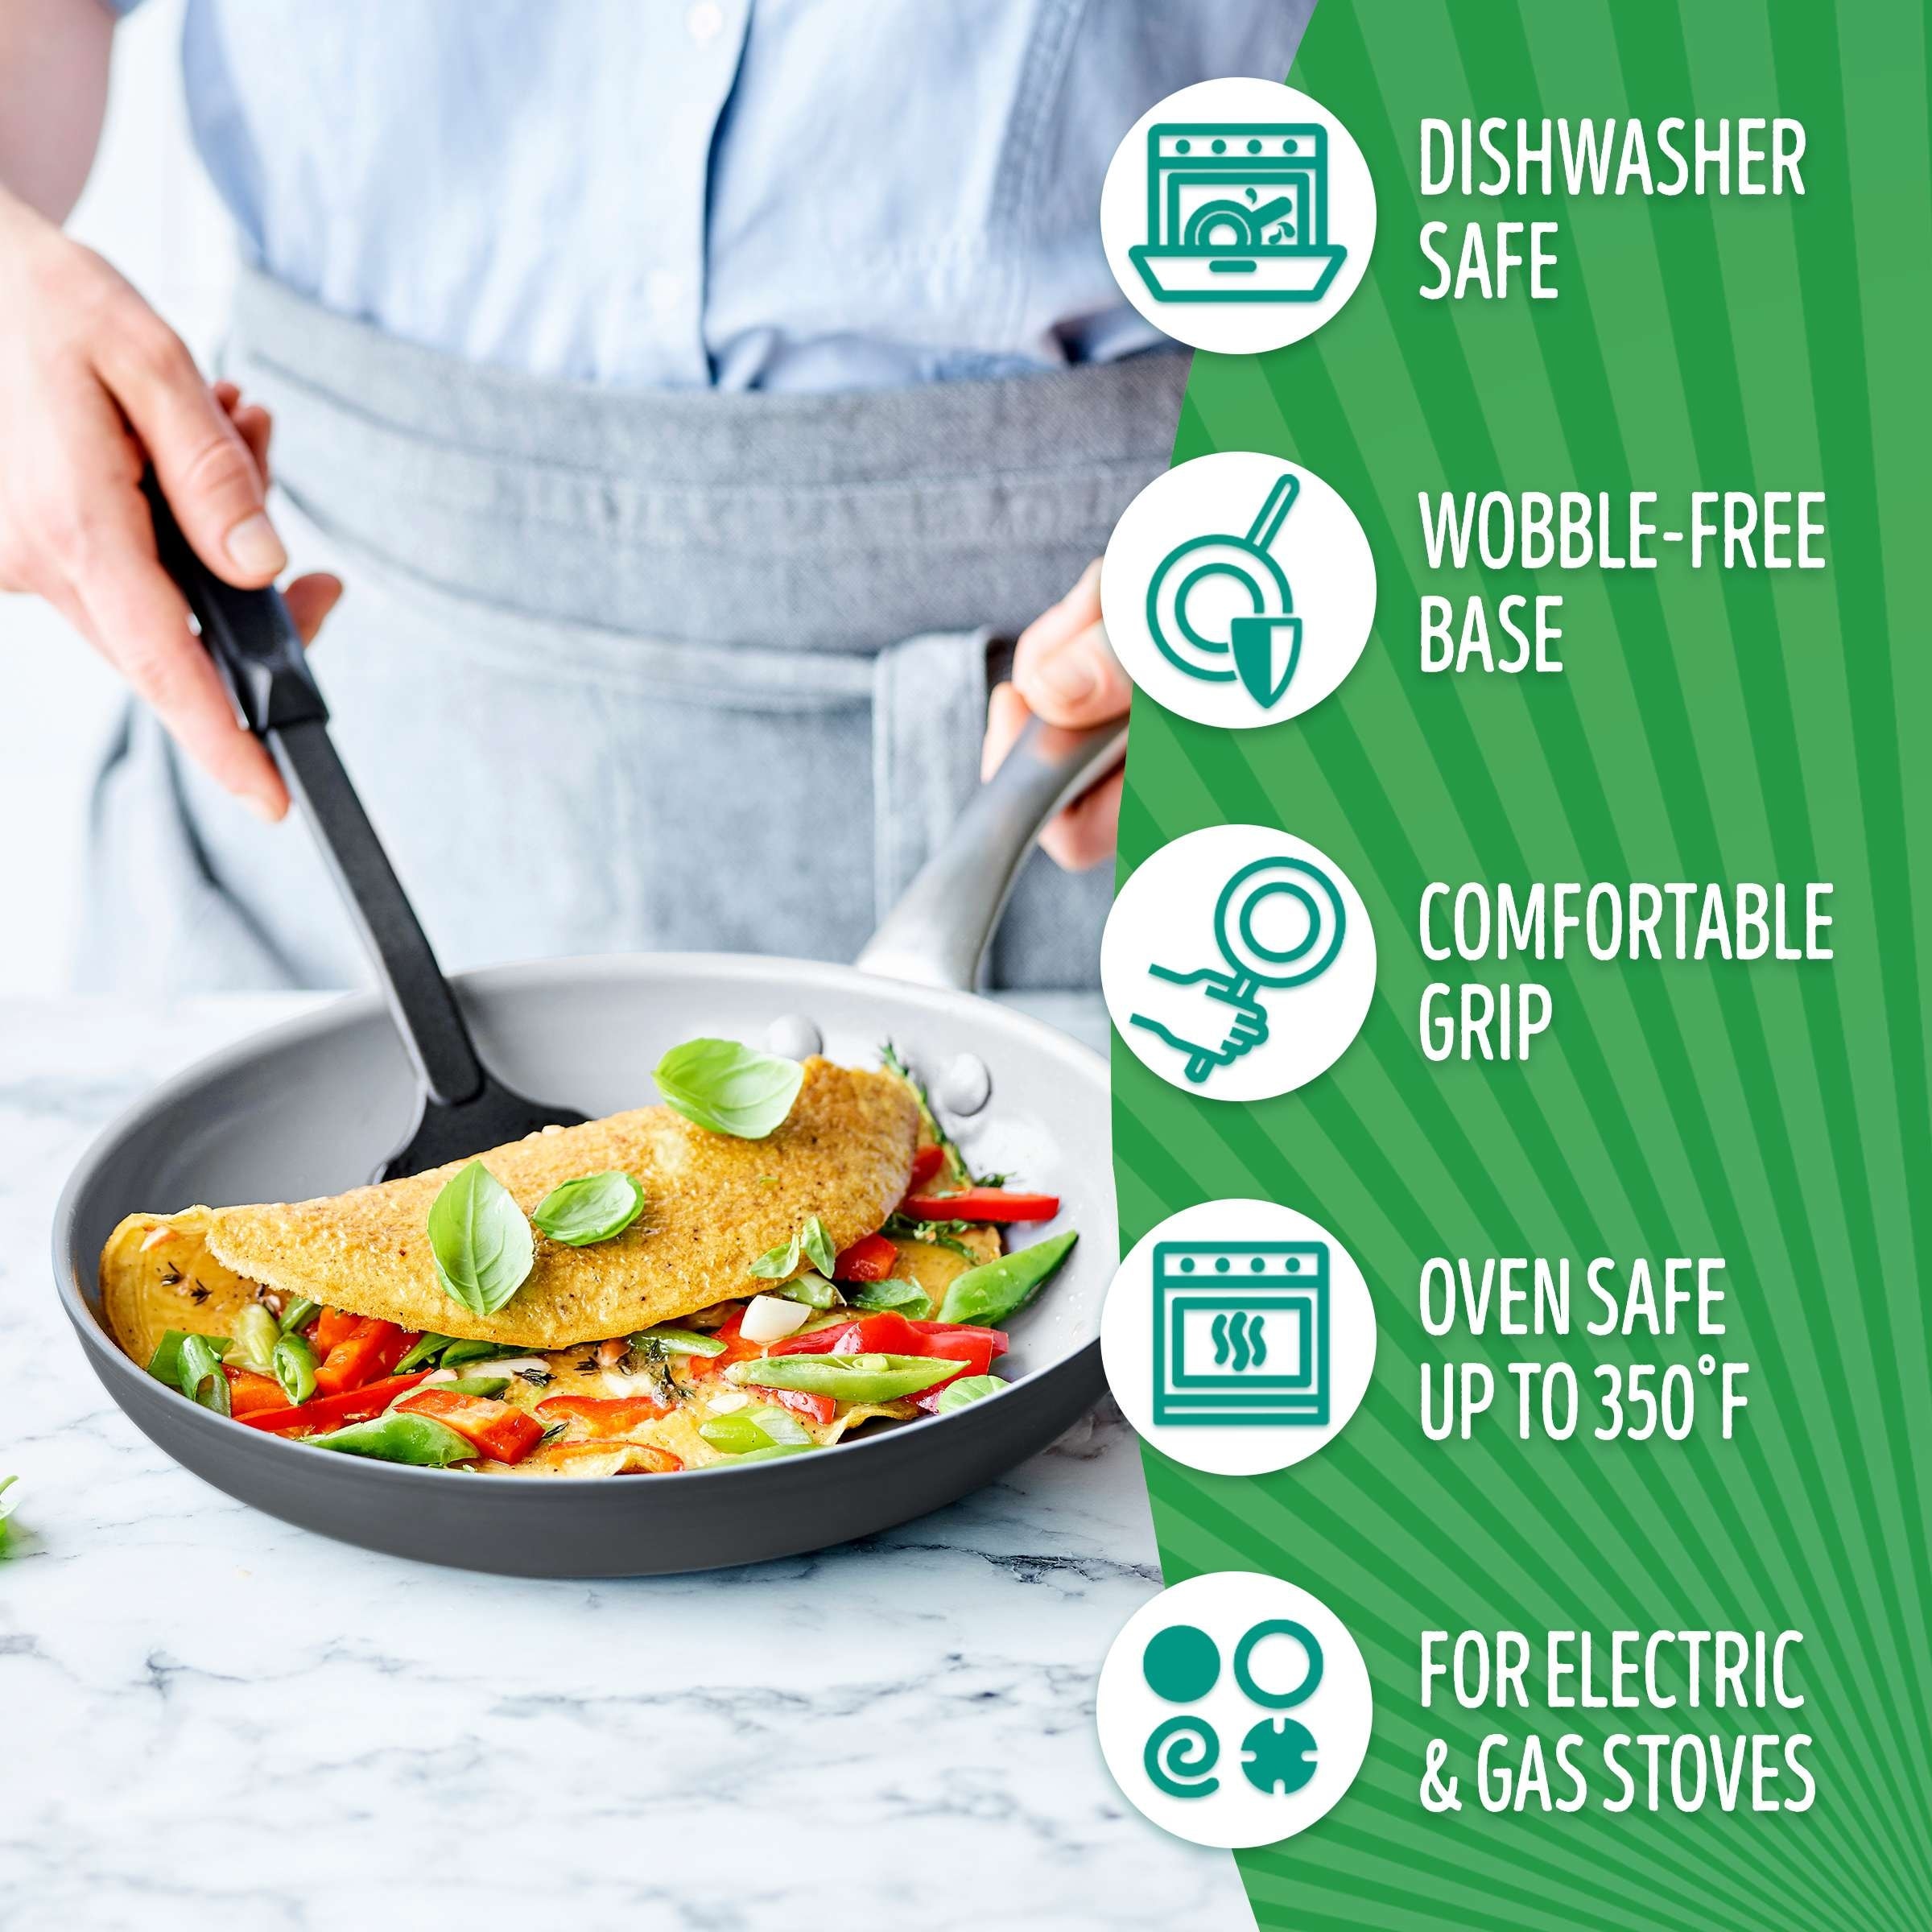 https://ak1.ostkcdn.com/images/products/is/images/direct/6db138a7ca70aace6a642925c9935dbe79749726/GreenLife-Classic-Pro-Ceramic-NonStick-12pc-Cookware-Set.jpg